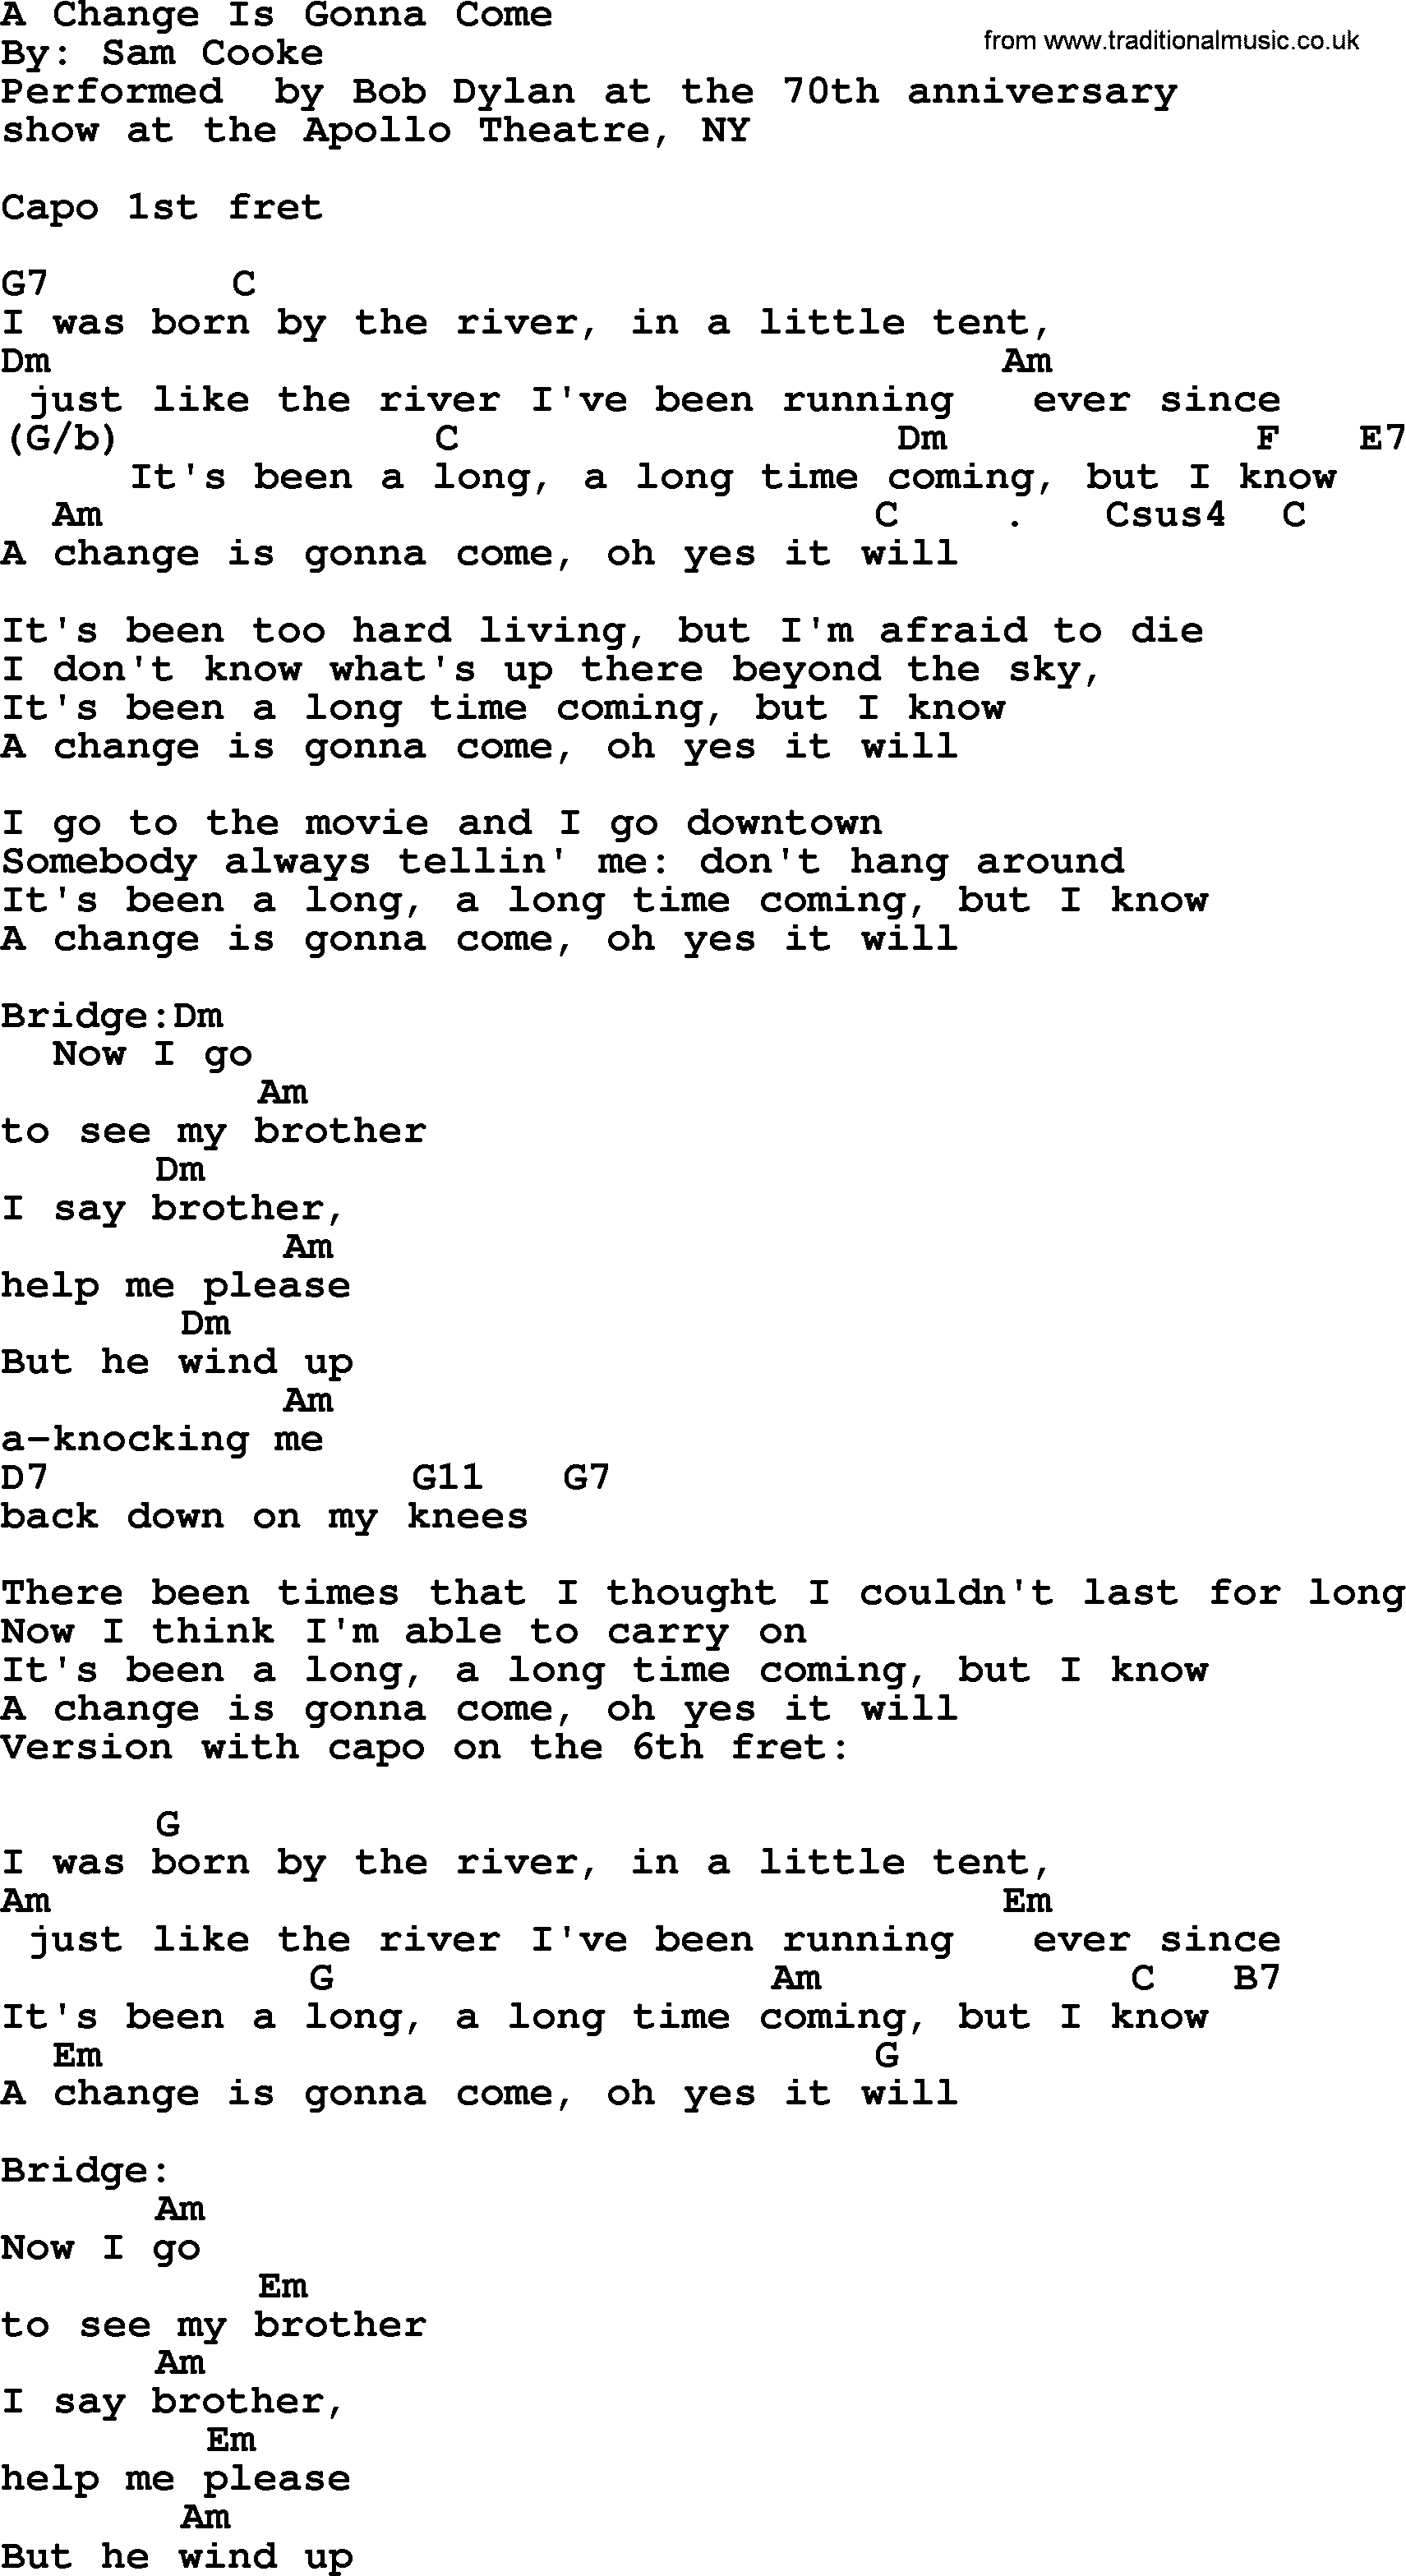 Bob Dylan song, lyrics with chords - A Change Is Gonna Come